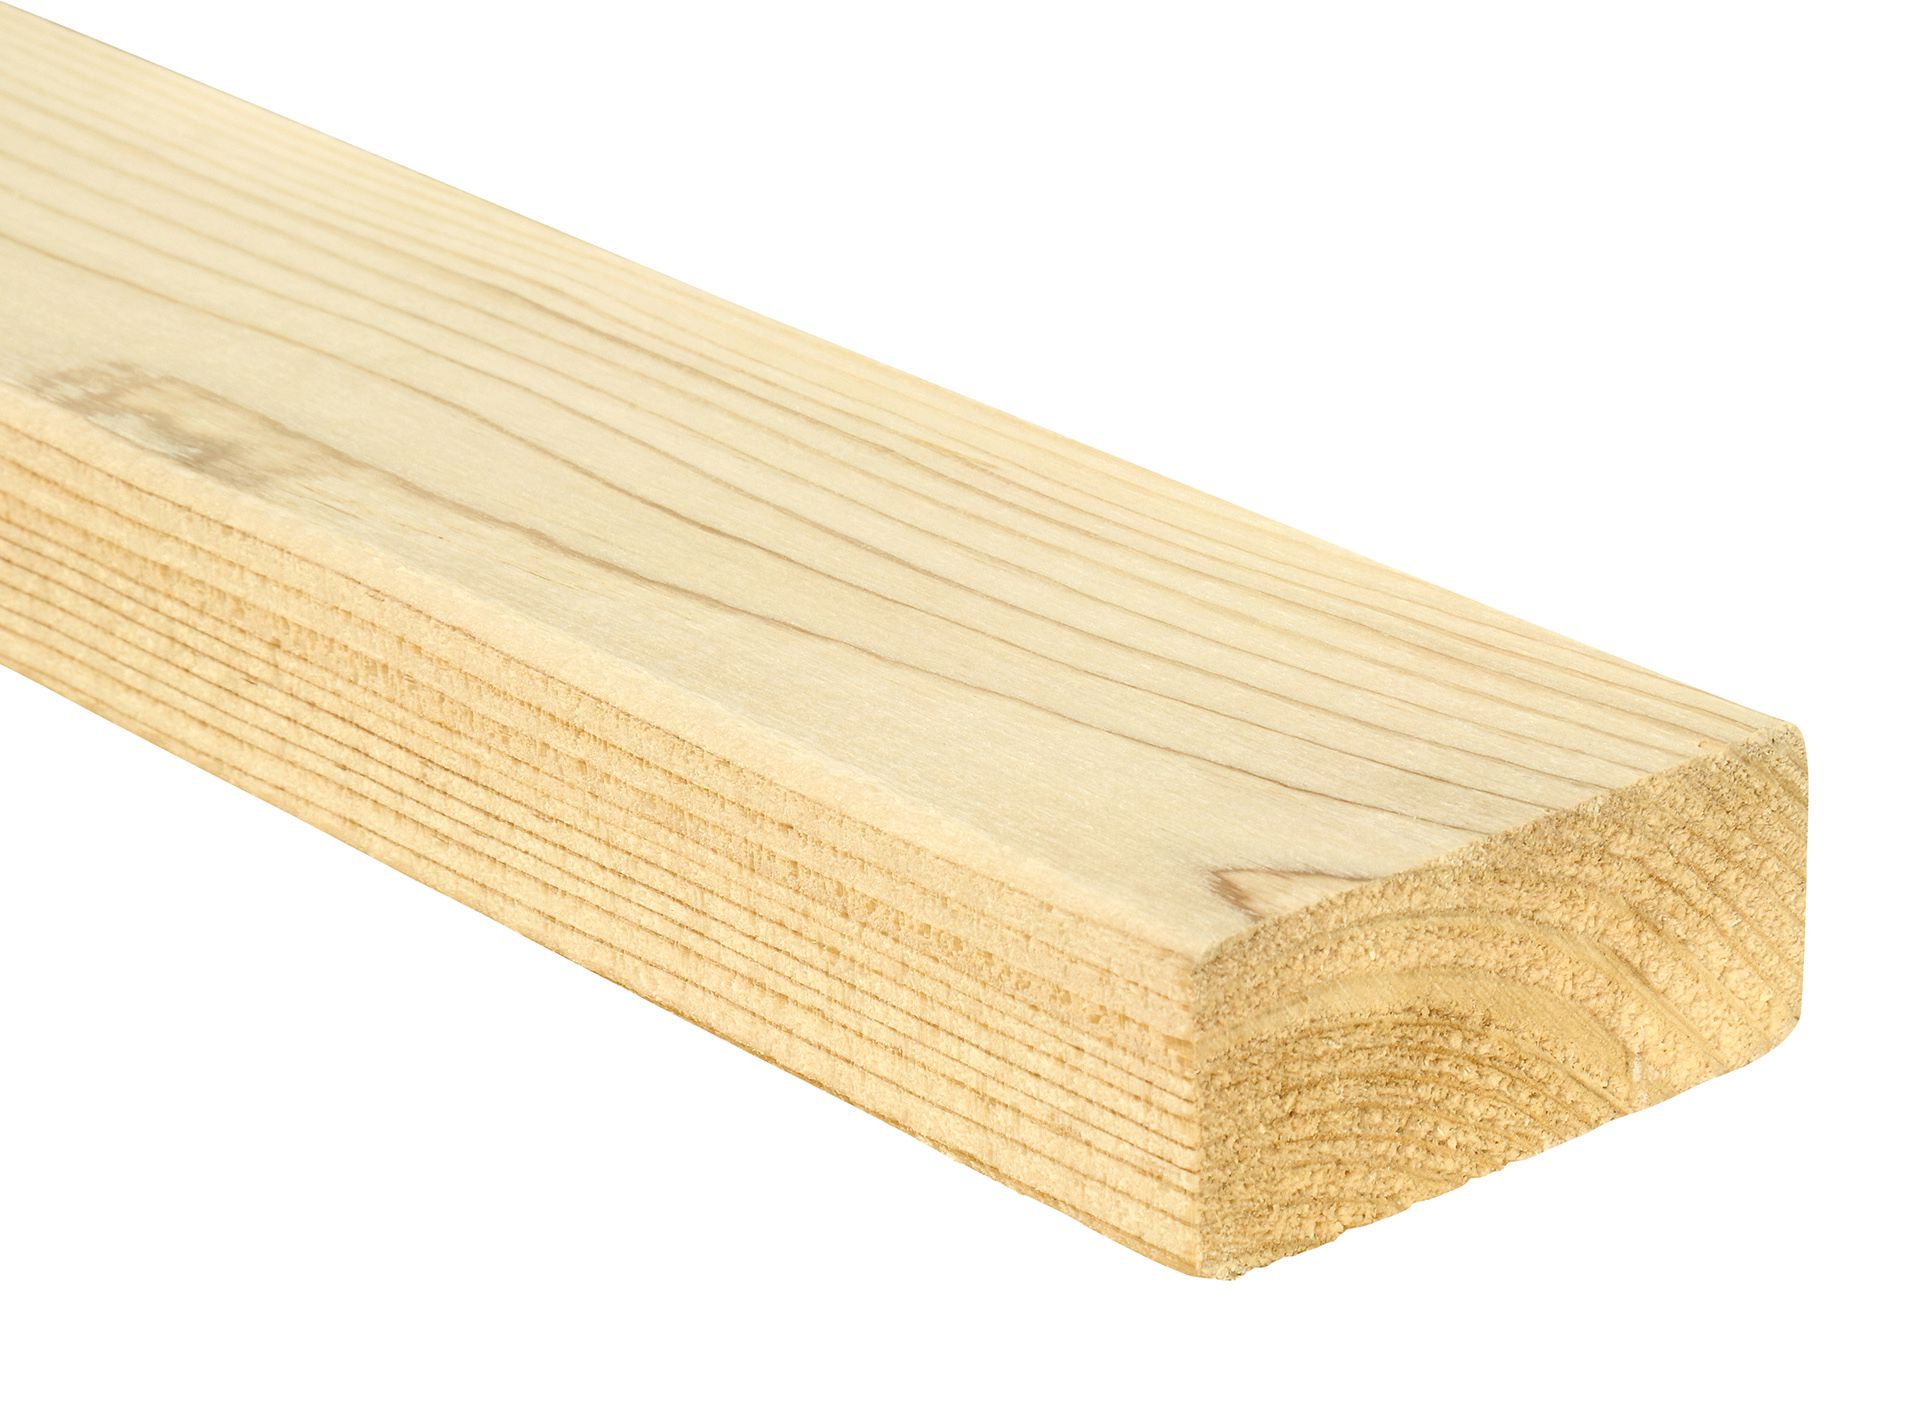 Image of Wickes Studwork CLS Timber - 38 x 89 x 3000mm